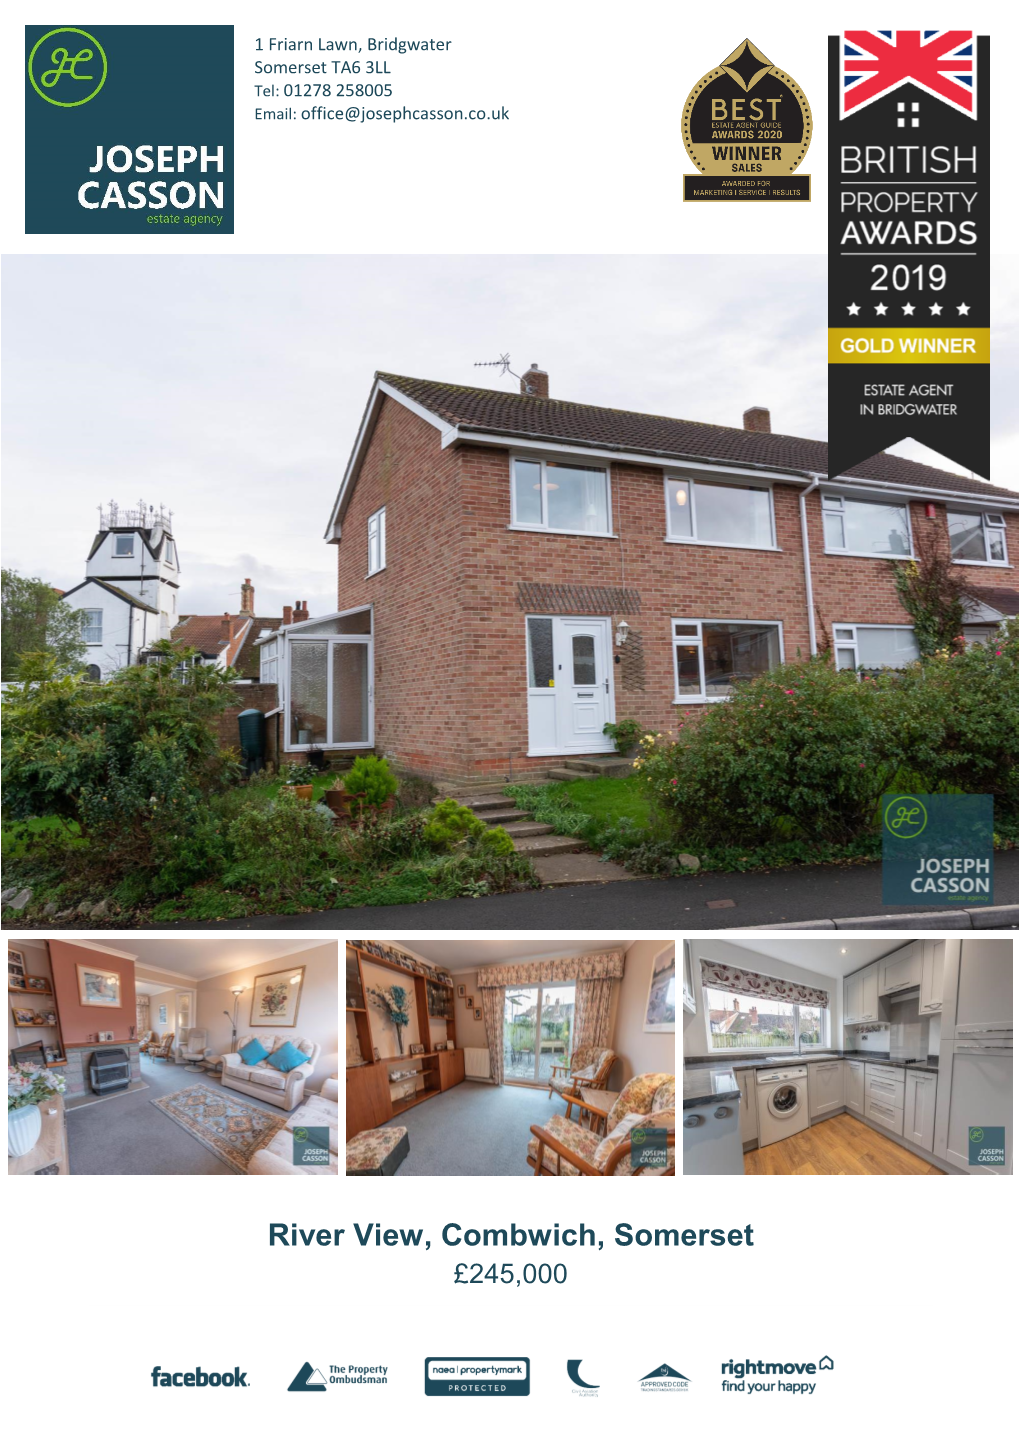 River View, Combwich, Somerset £245,000